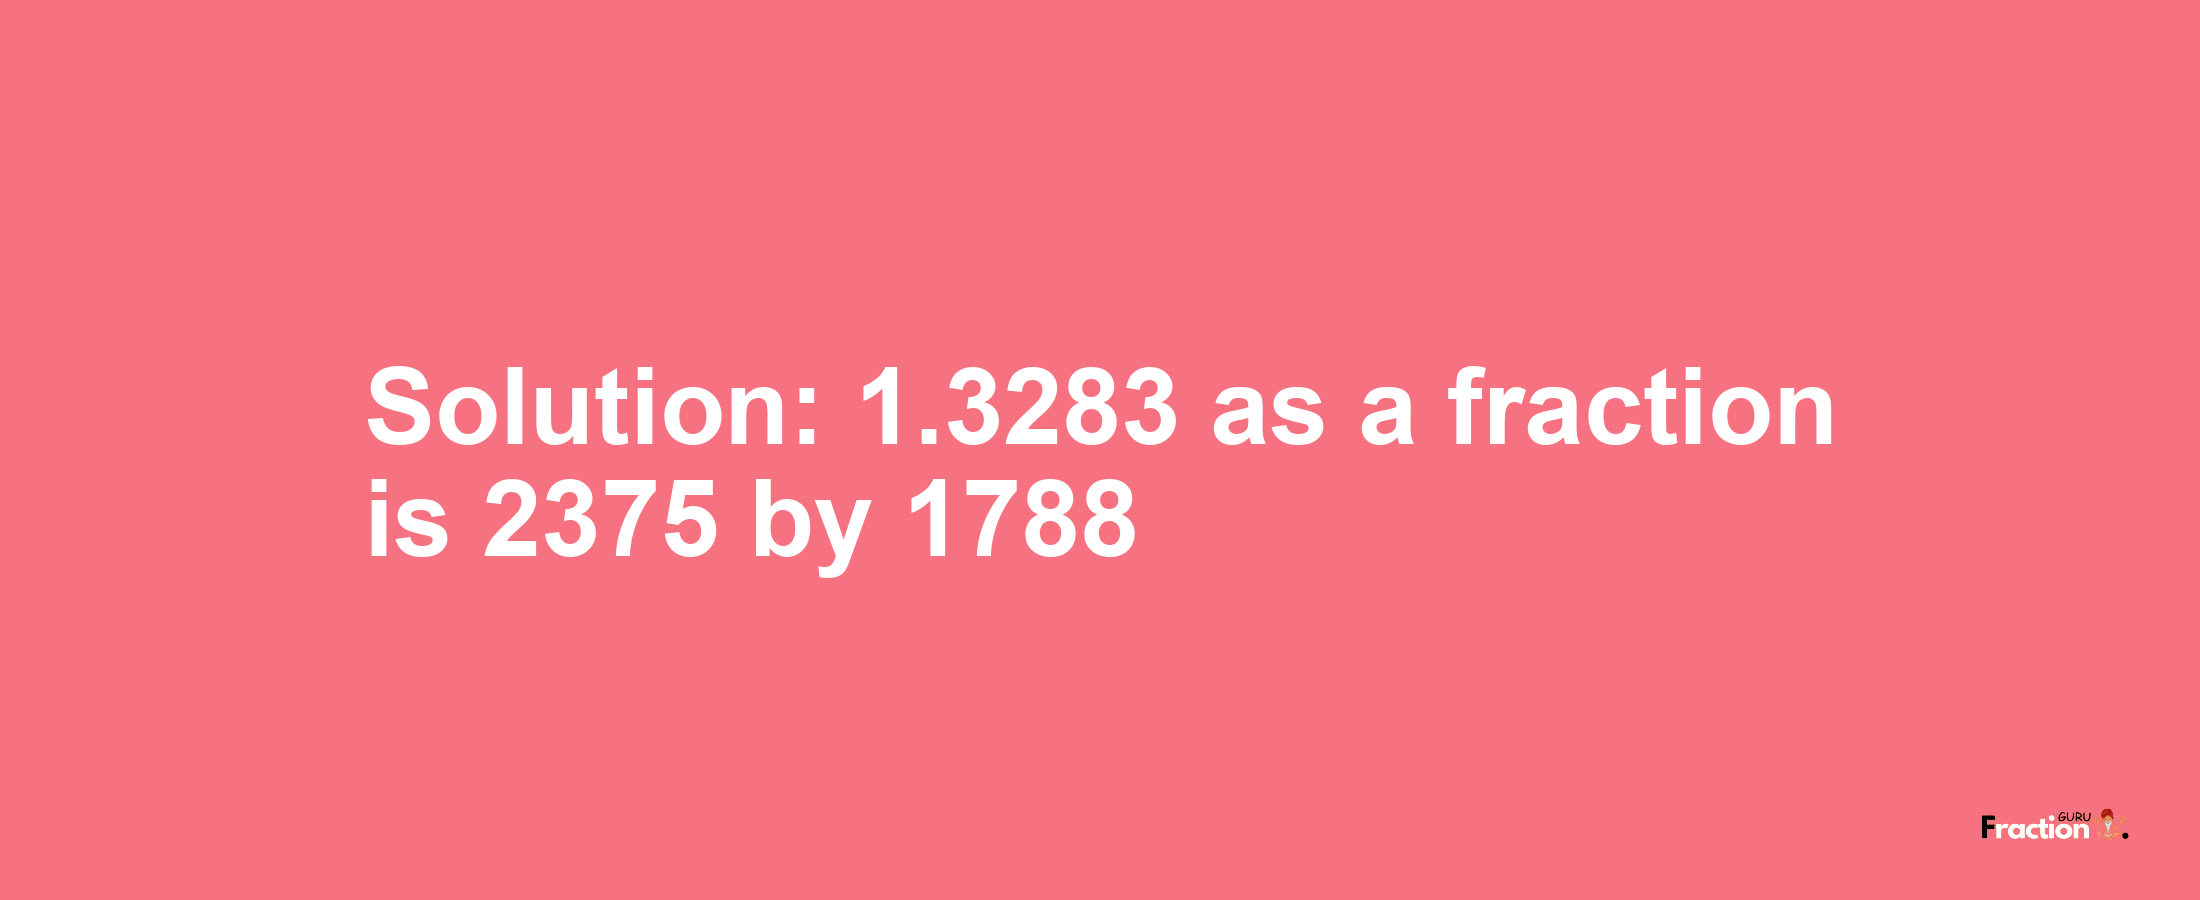 Solution:1.3283 as a fraction is 2375/1788